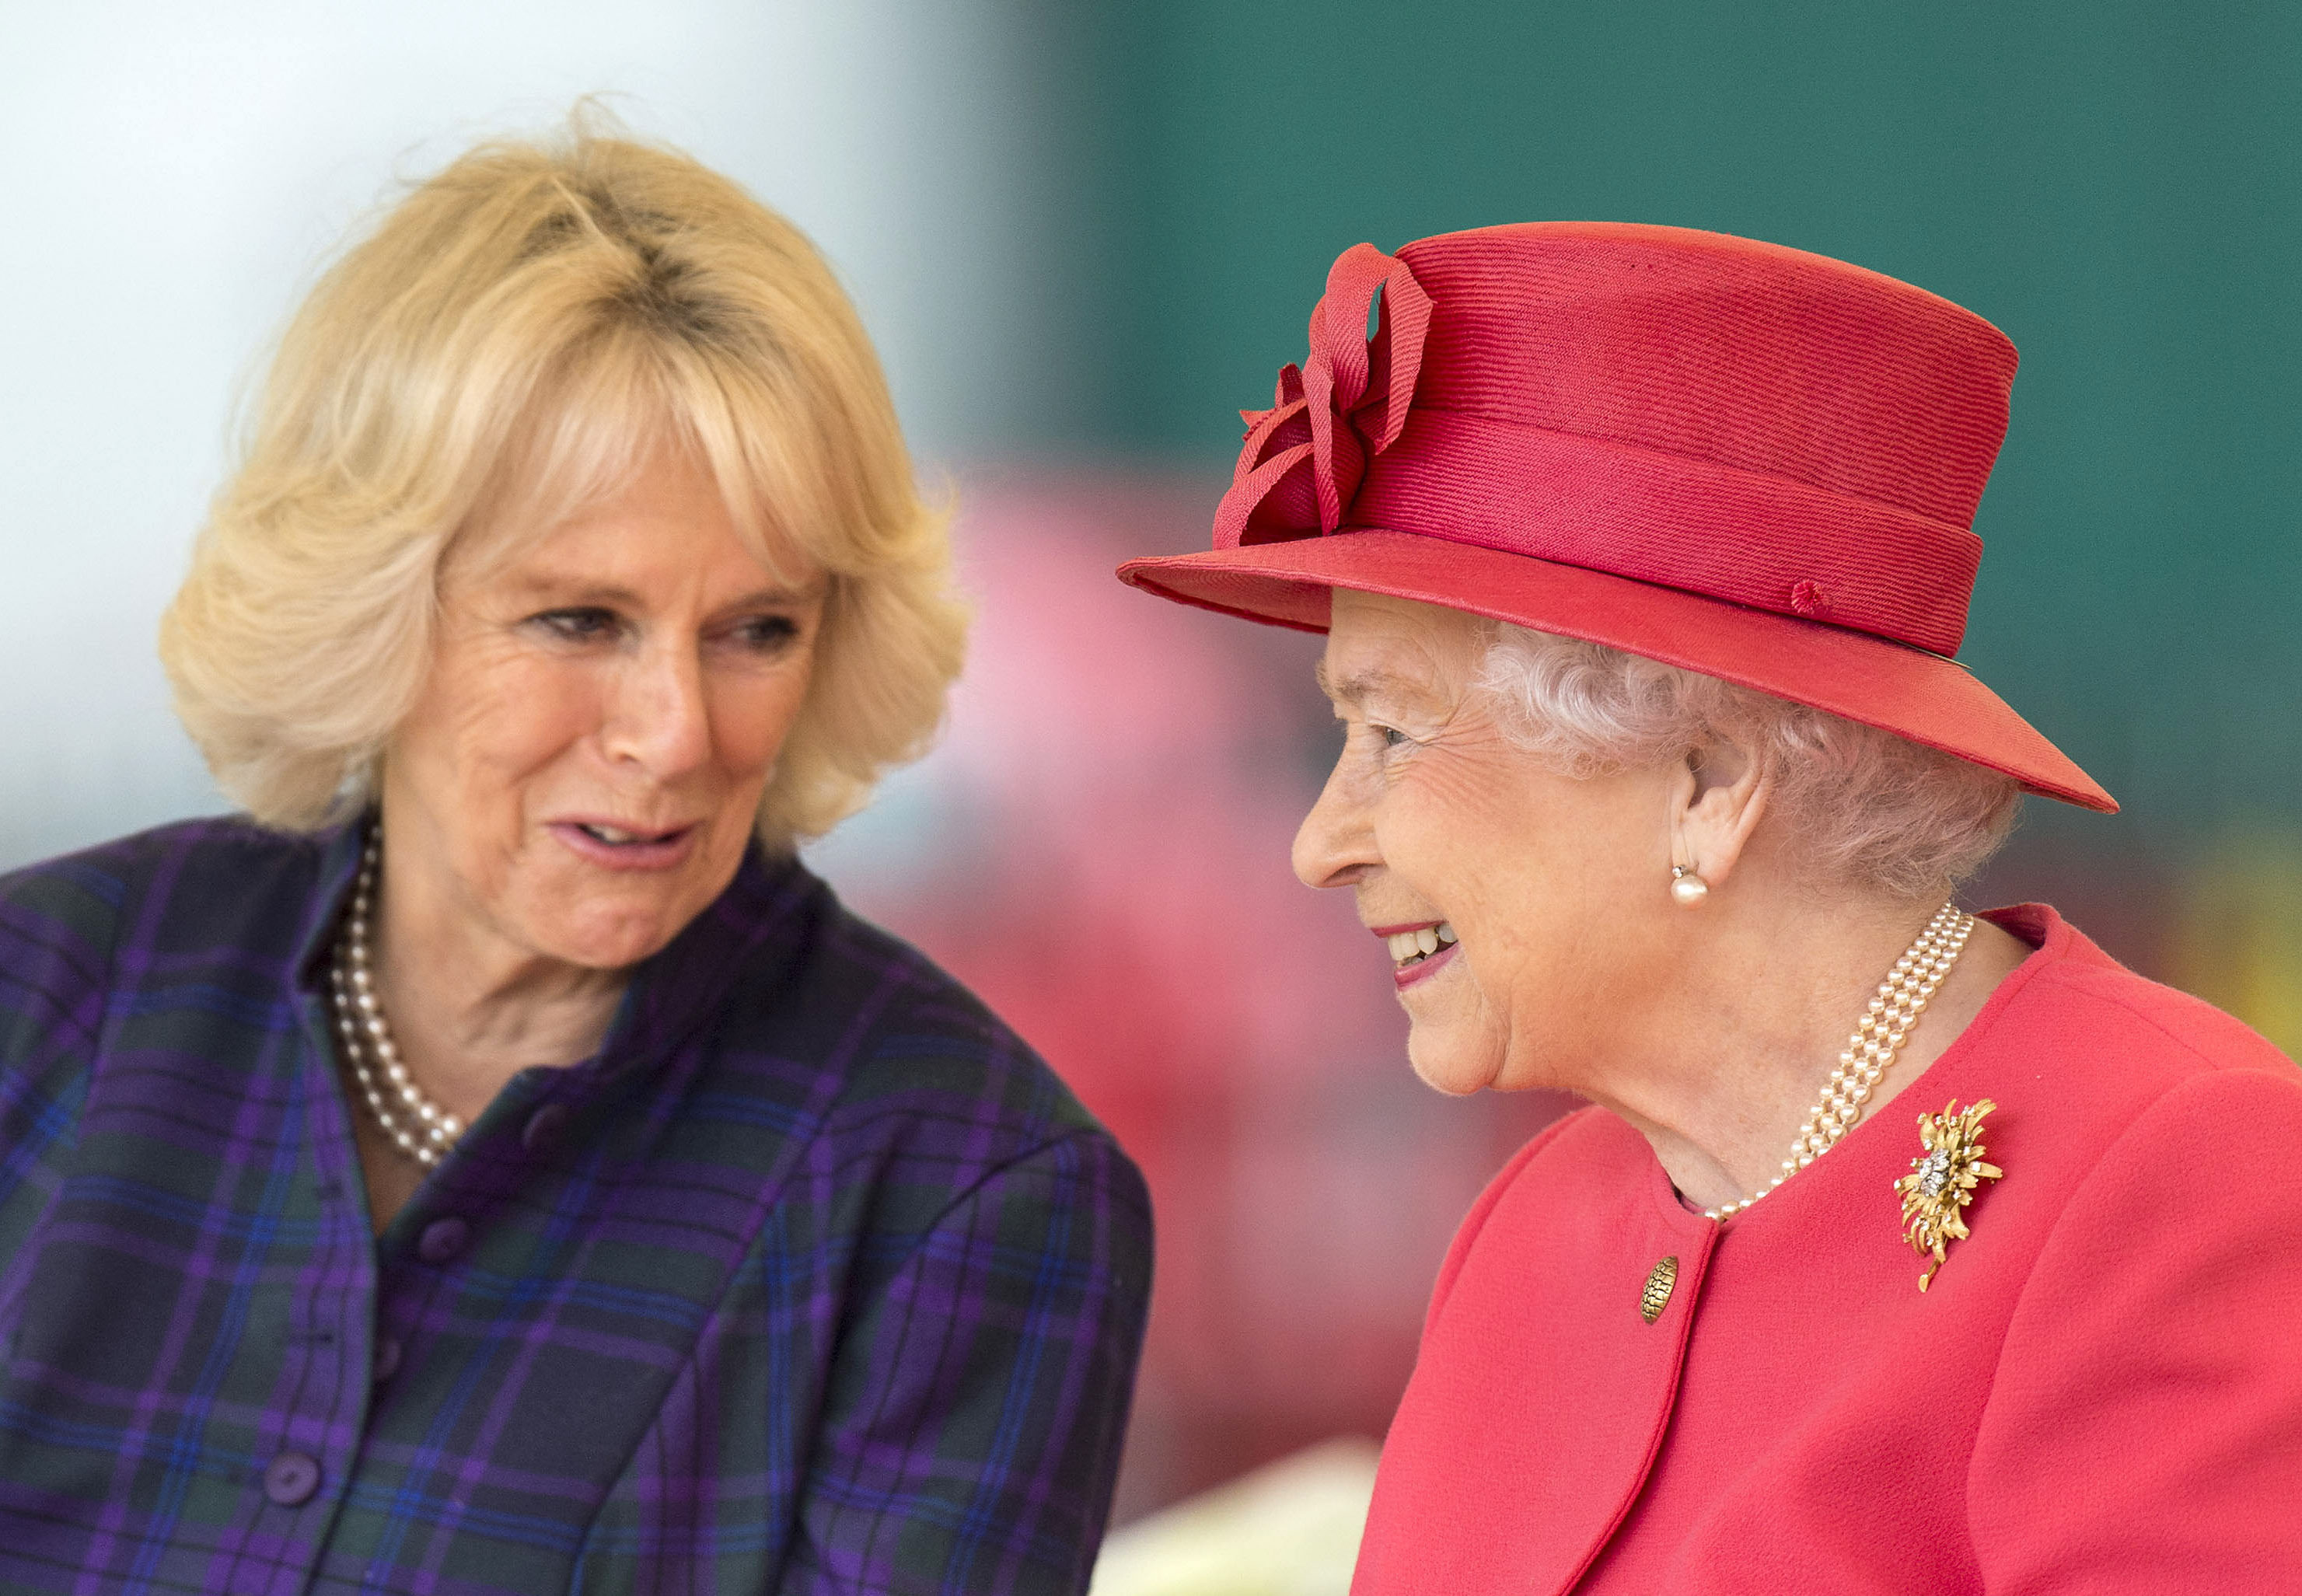 Queen Elizabeth and Camilla, Duchess of Cornwall at Ebony Horse Club Community Riding Centre in October 2013, in London, England. Photo: Getty Images